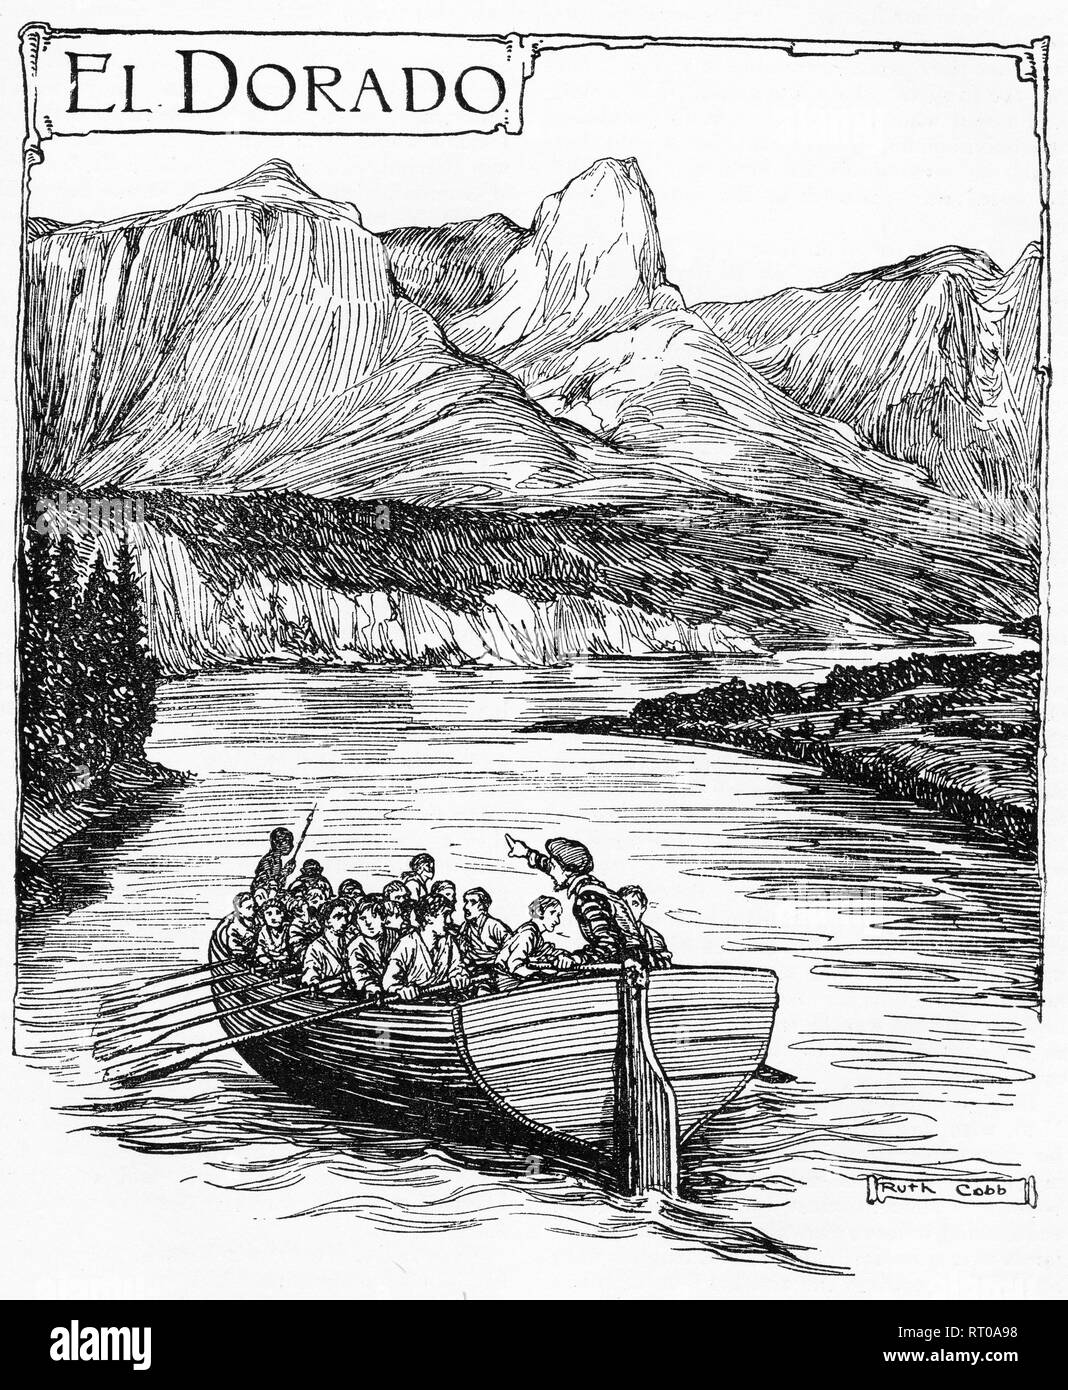 Engraving of a boat load of conquistadors trying to find El Dorado. From Chatterbox magazine, 1905 Stock Photo